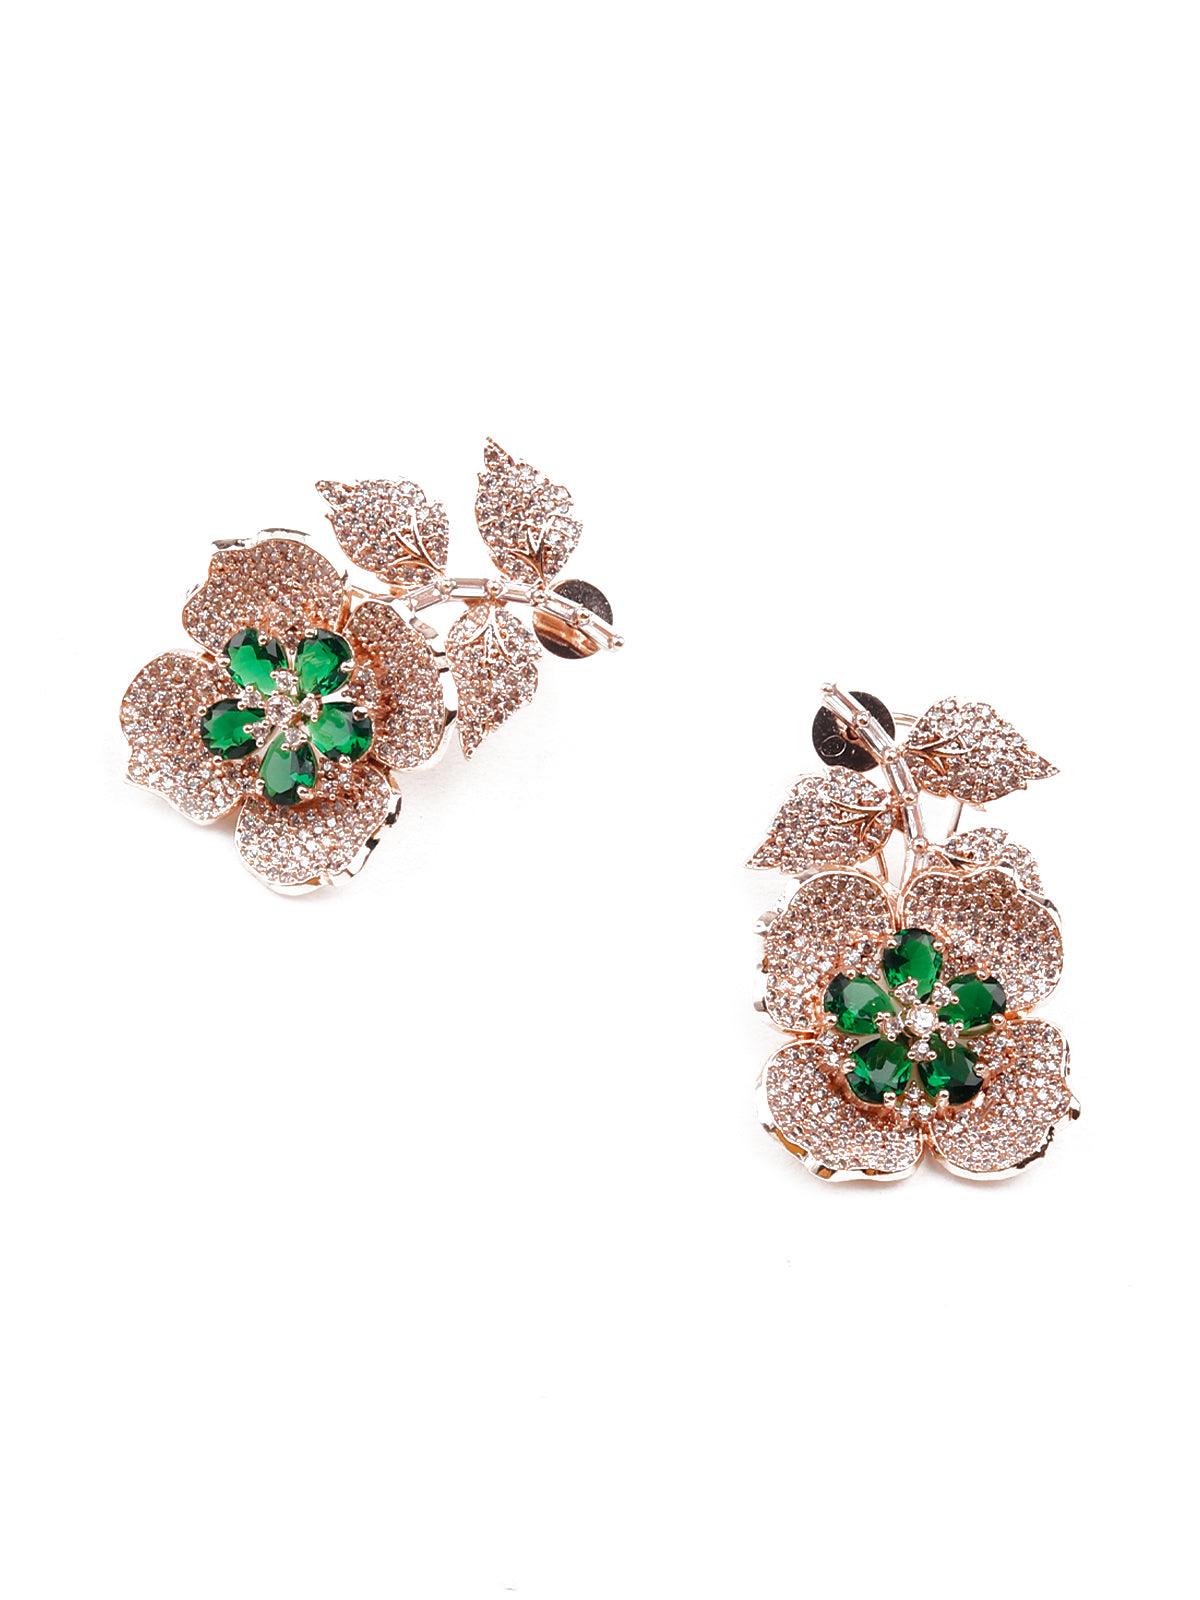 Women's Gorgeous Gold Floral Statement Earrings - Odette